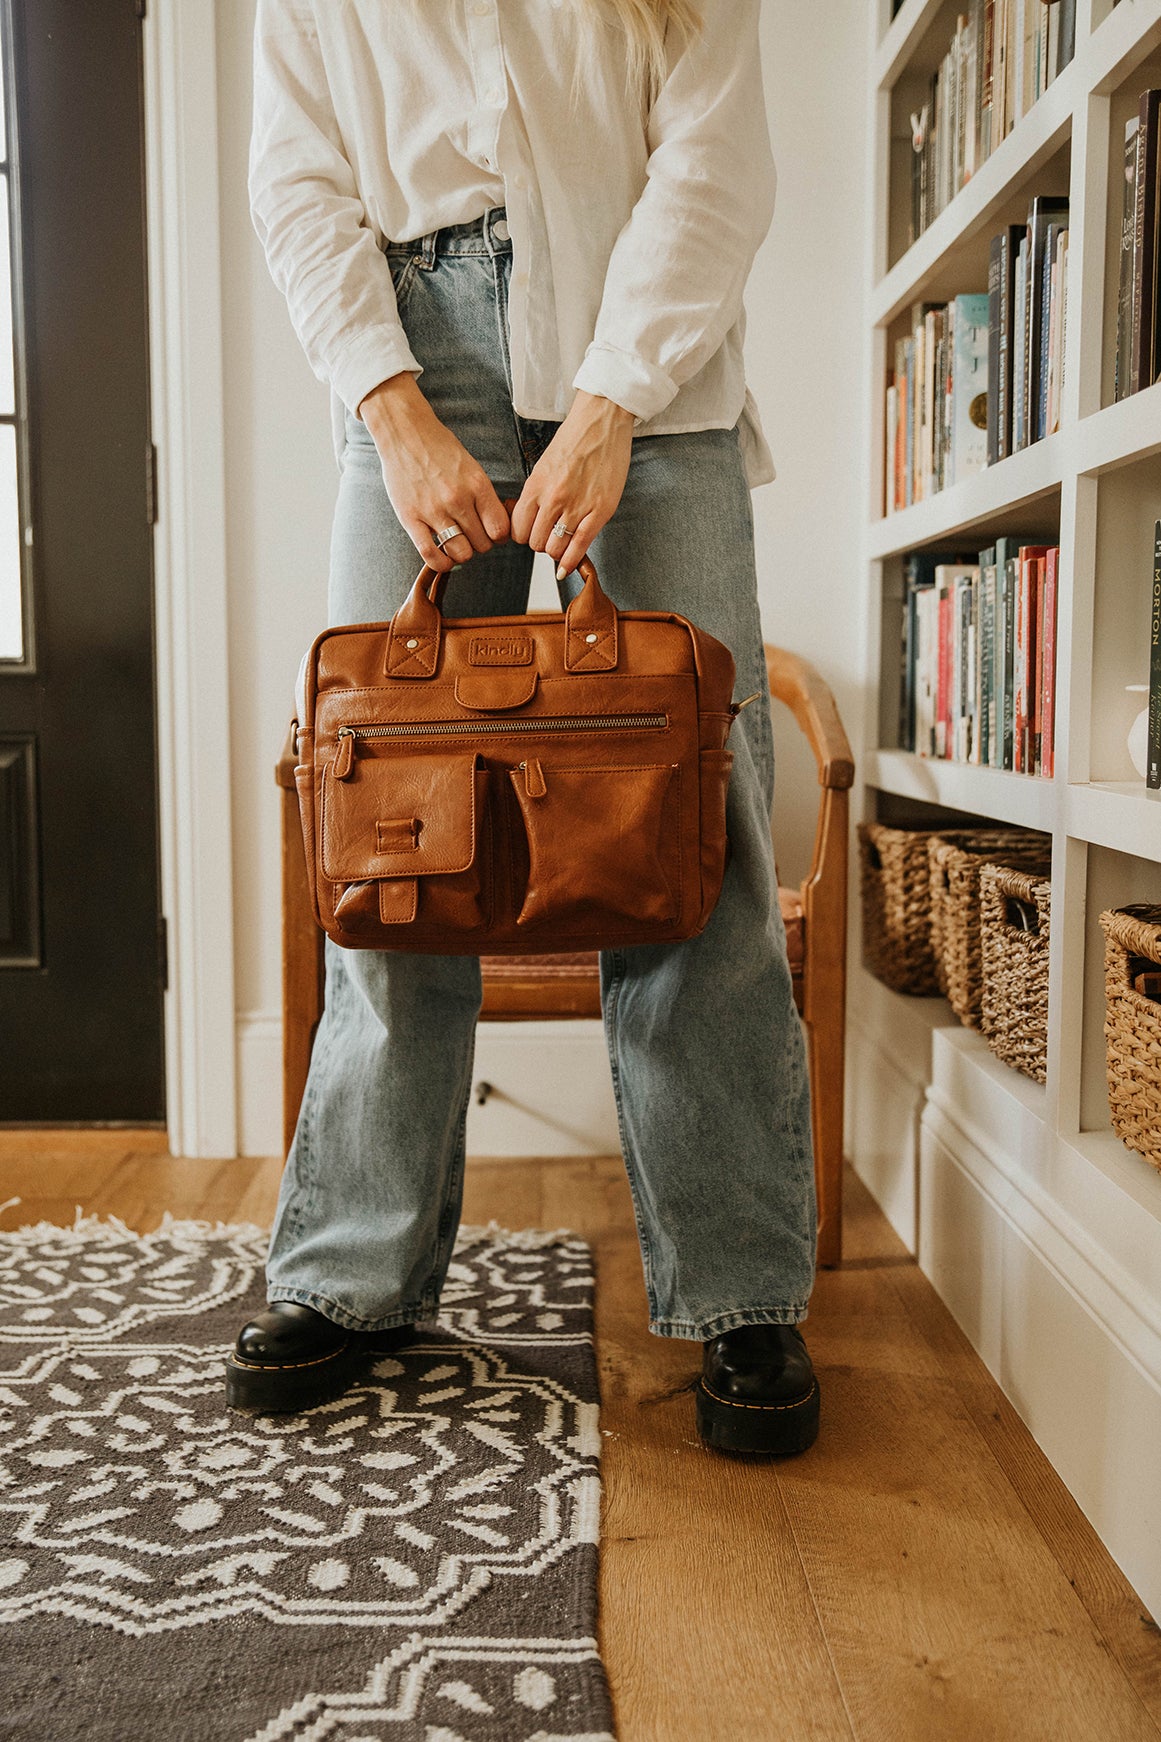 The Camryn - Our Mid-Size Camera Bag